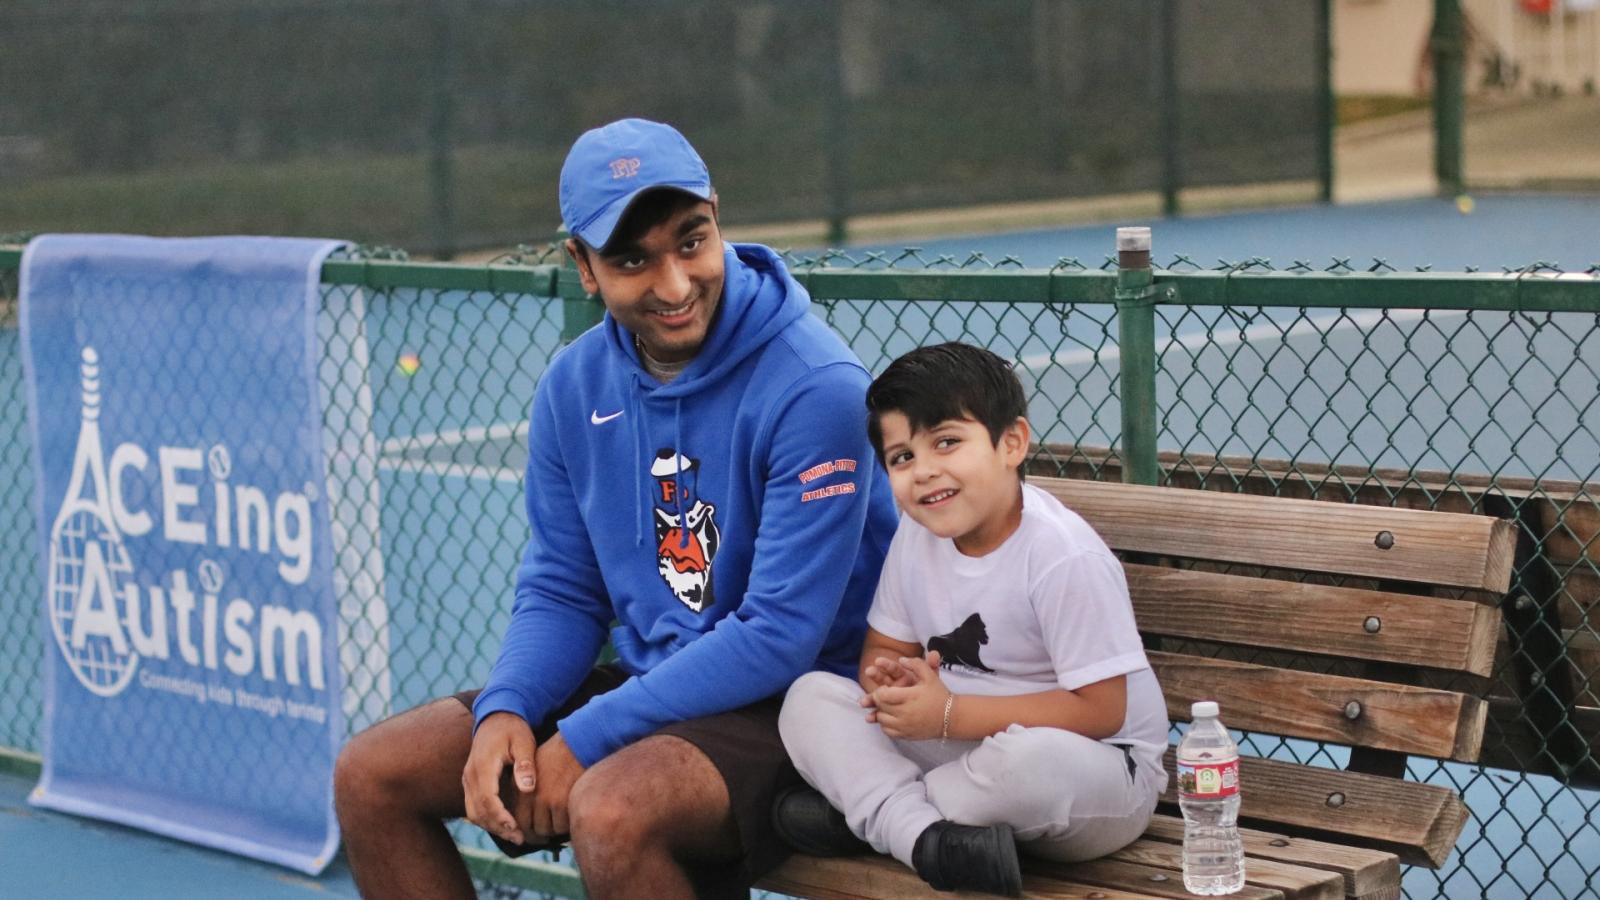 Sagehen tennis player with child during ACEing Autism session at Pomona College.